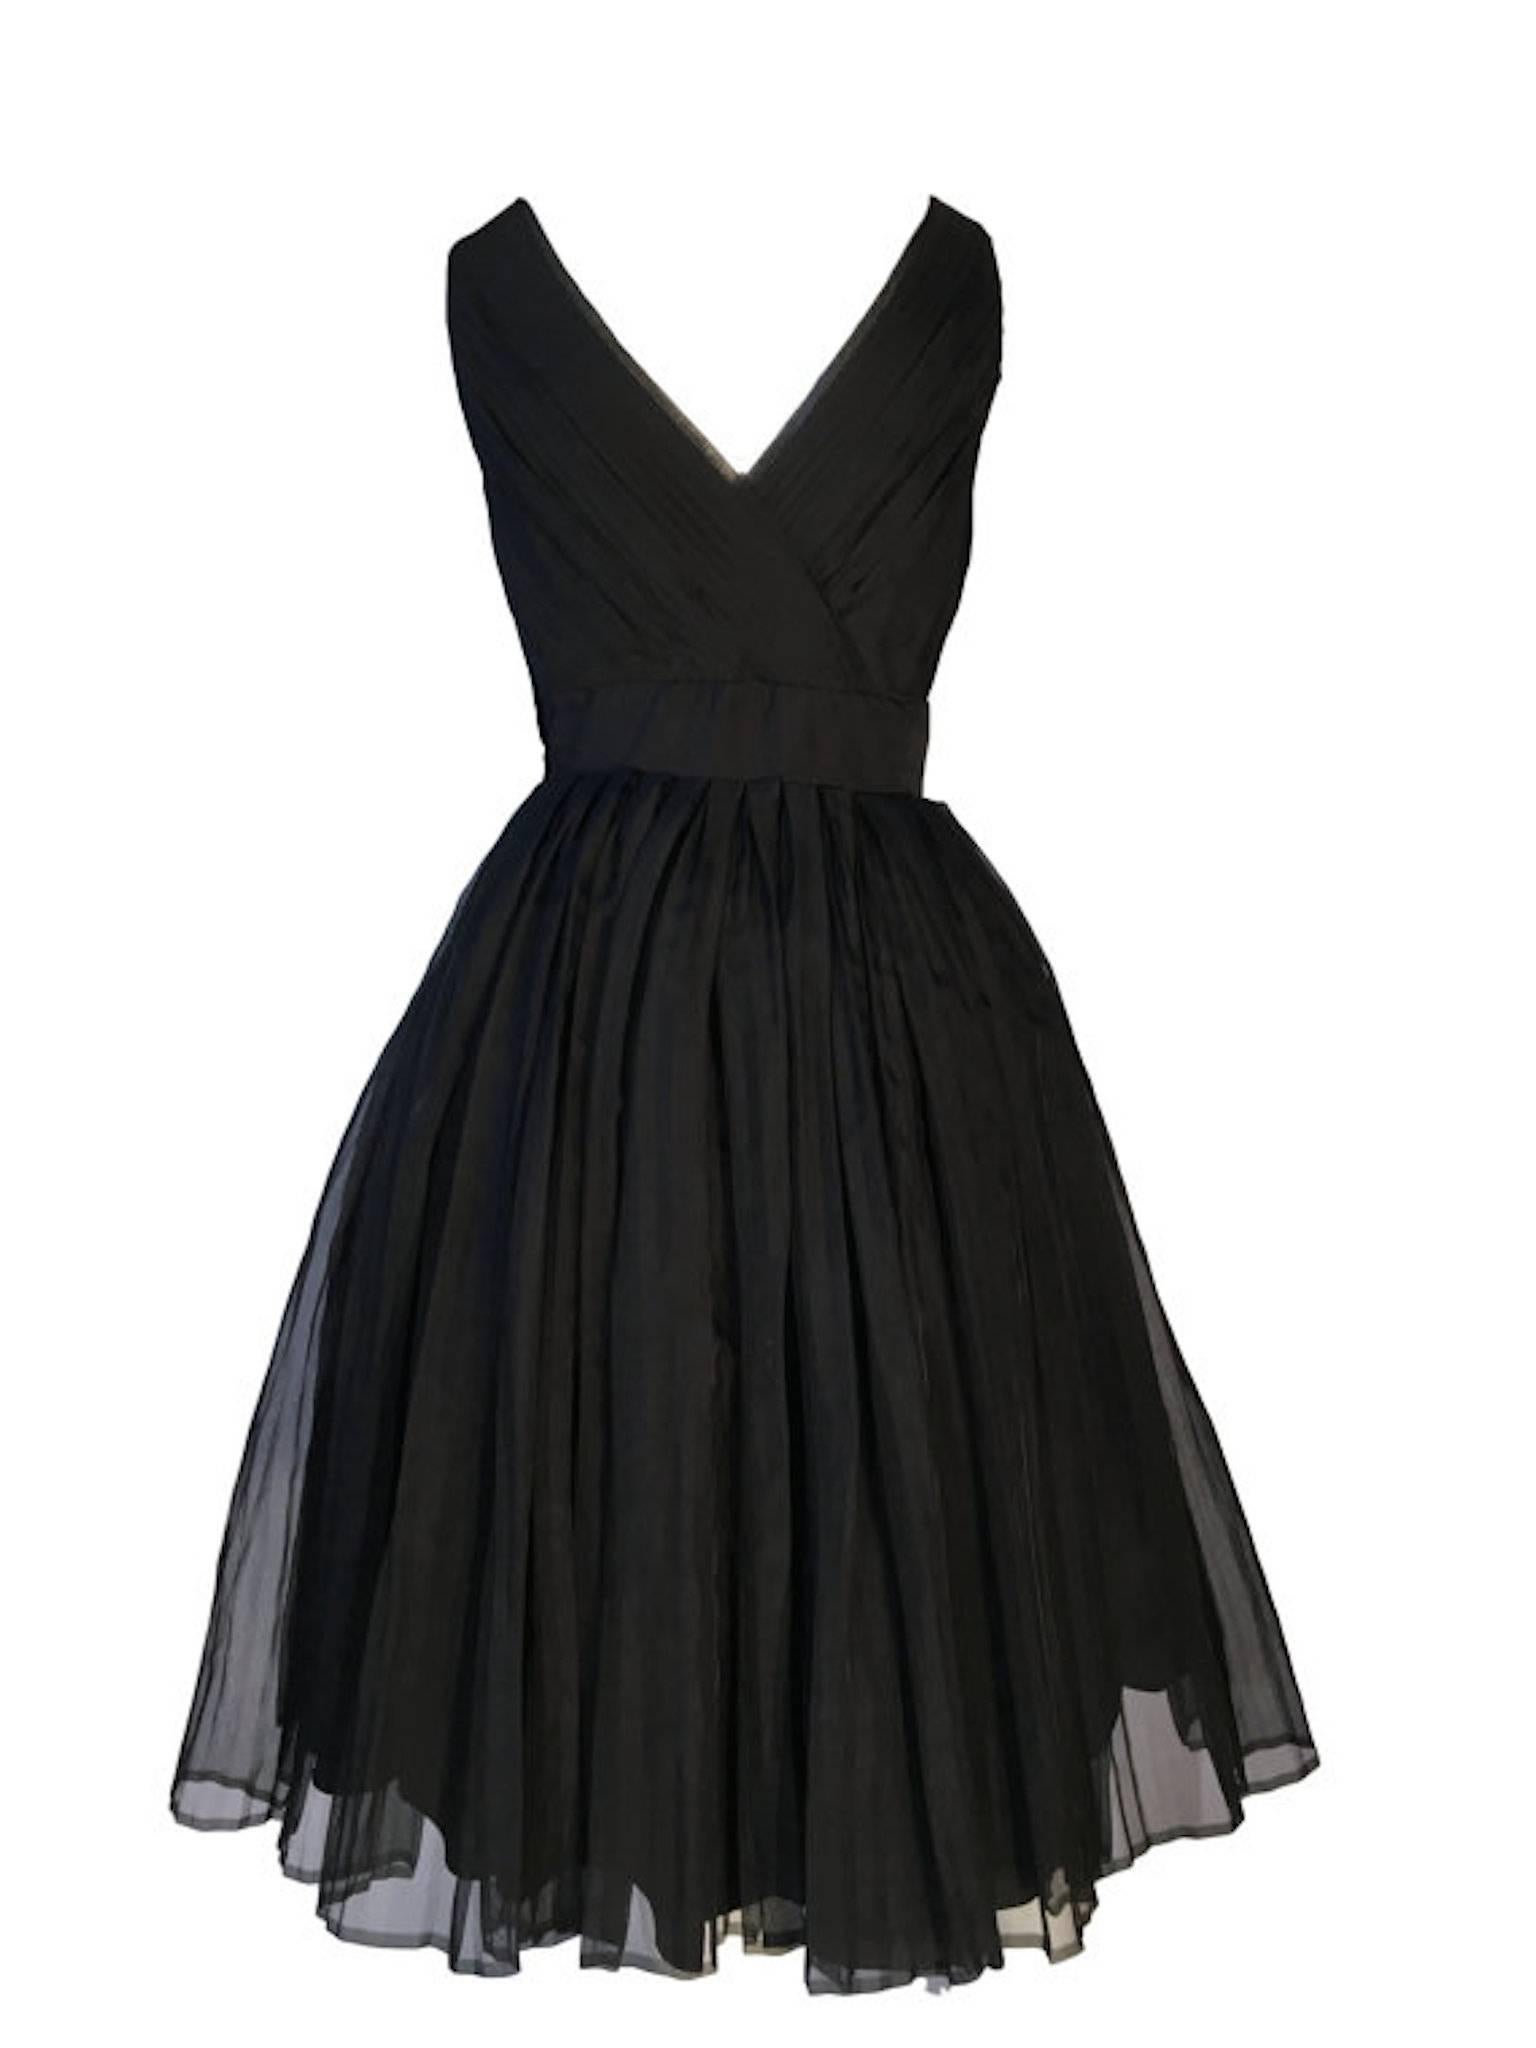 Vintage Jean Allen 1960 Black Chiffon Evening Dress UK 10 In Excellent Condition For Sale In Portsmouth, Hampshire